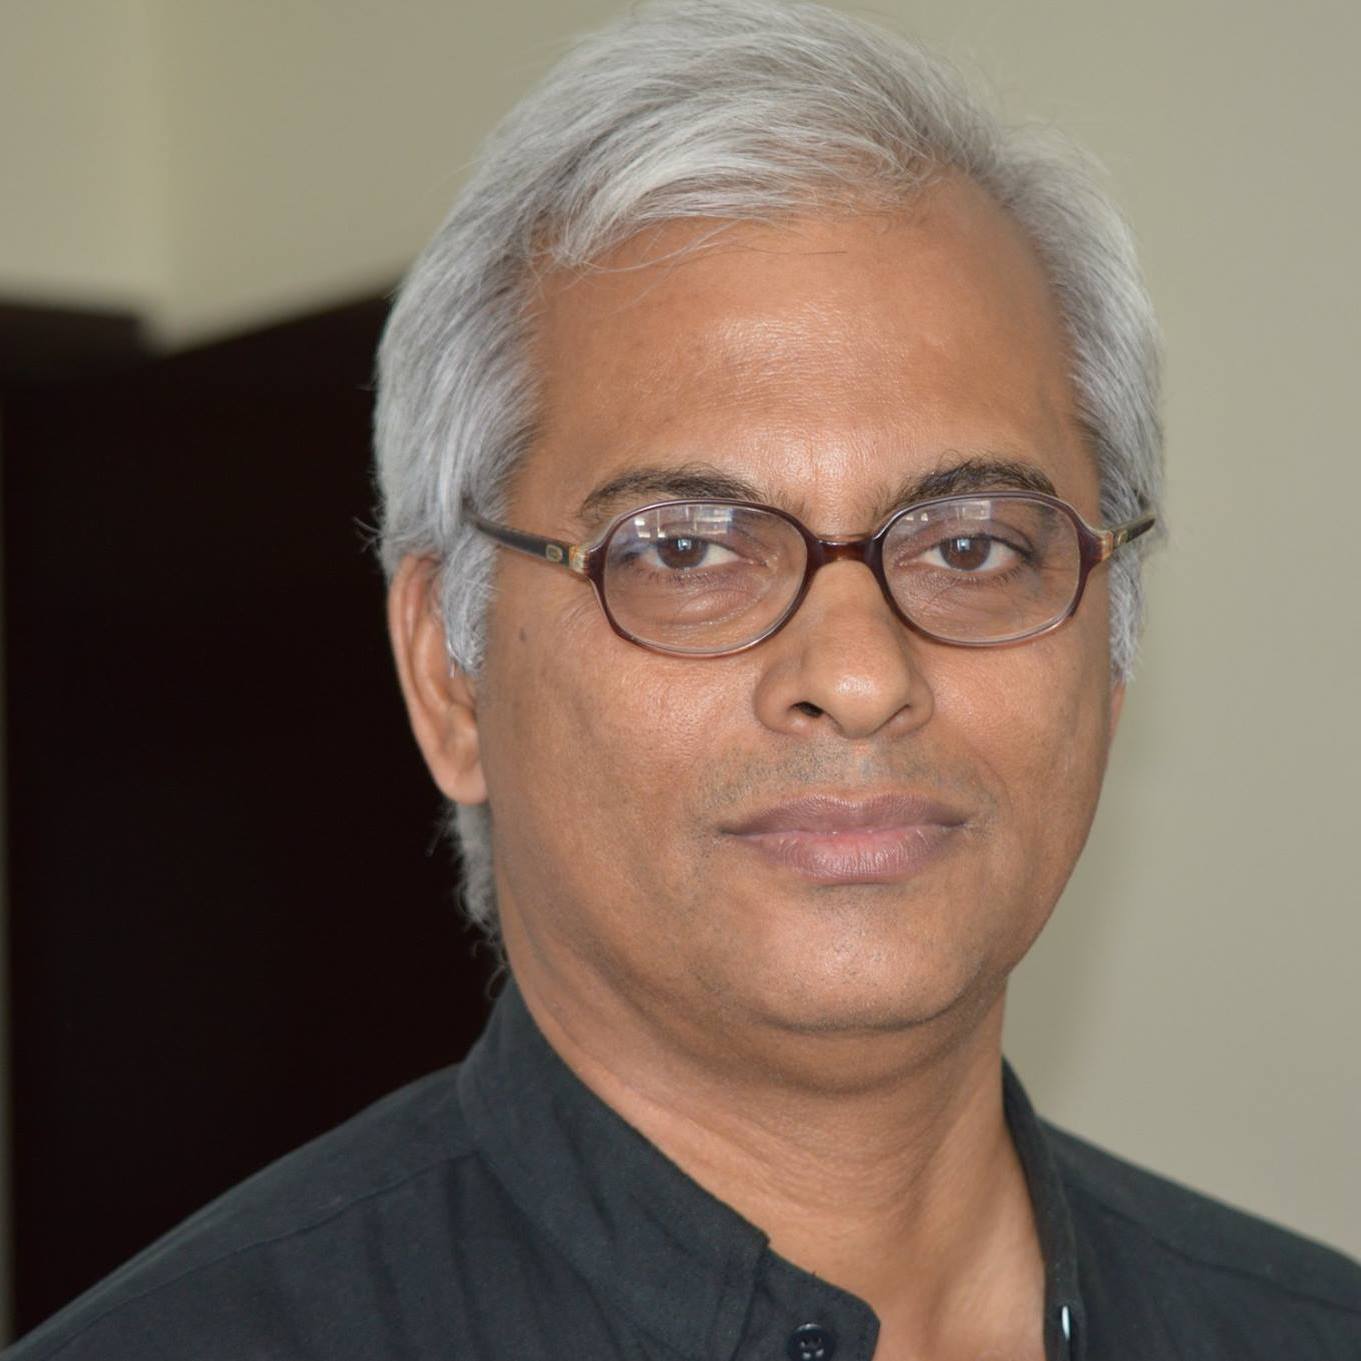 Father Tom Uzhunnalil, a Salesian priest who was seized during a terrorist attack in Yemen on March 4, remains in the custody of unknown group who are likely Islamic extremists, his Salesian superiors announced. He was the chaplain of the nursing home in Aden run by the Missionaries of Charity. Four Sisters of Mother Teresa  nuns were killed in the terrorist raid; the priest was kidnapped. Unconfirmed rumors spreading throughout the Internet claim he will be crucified on Good Friday, which is March 25.